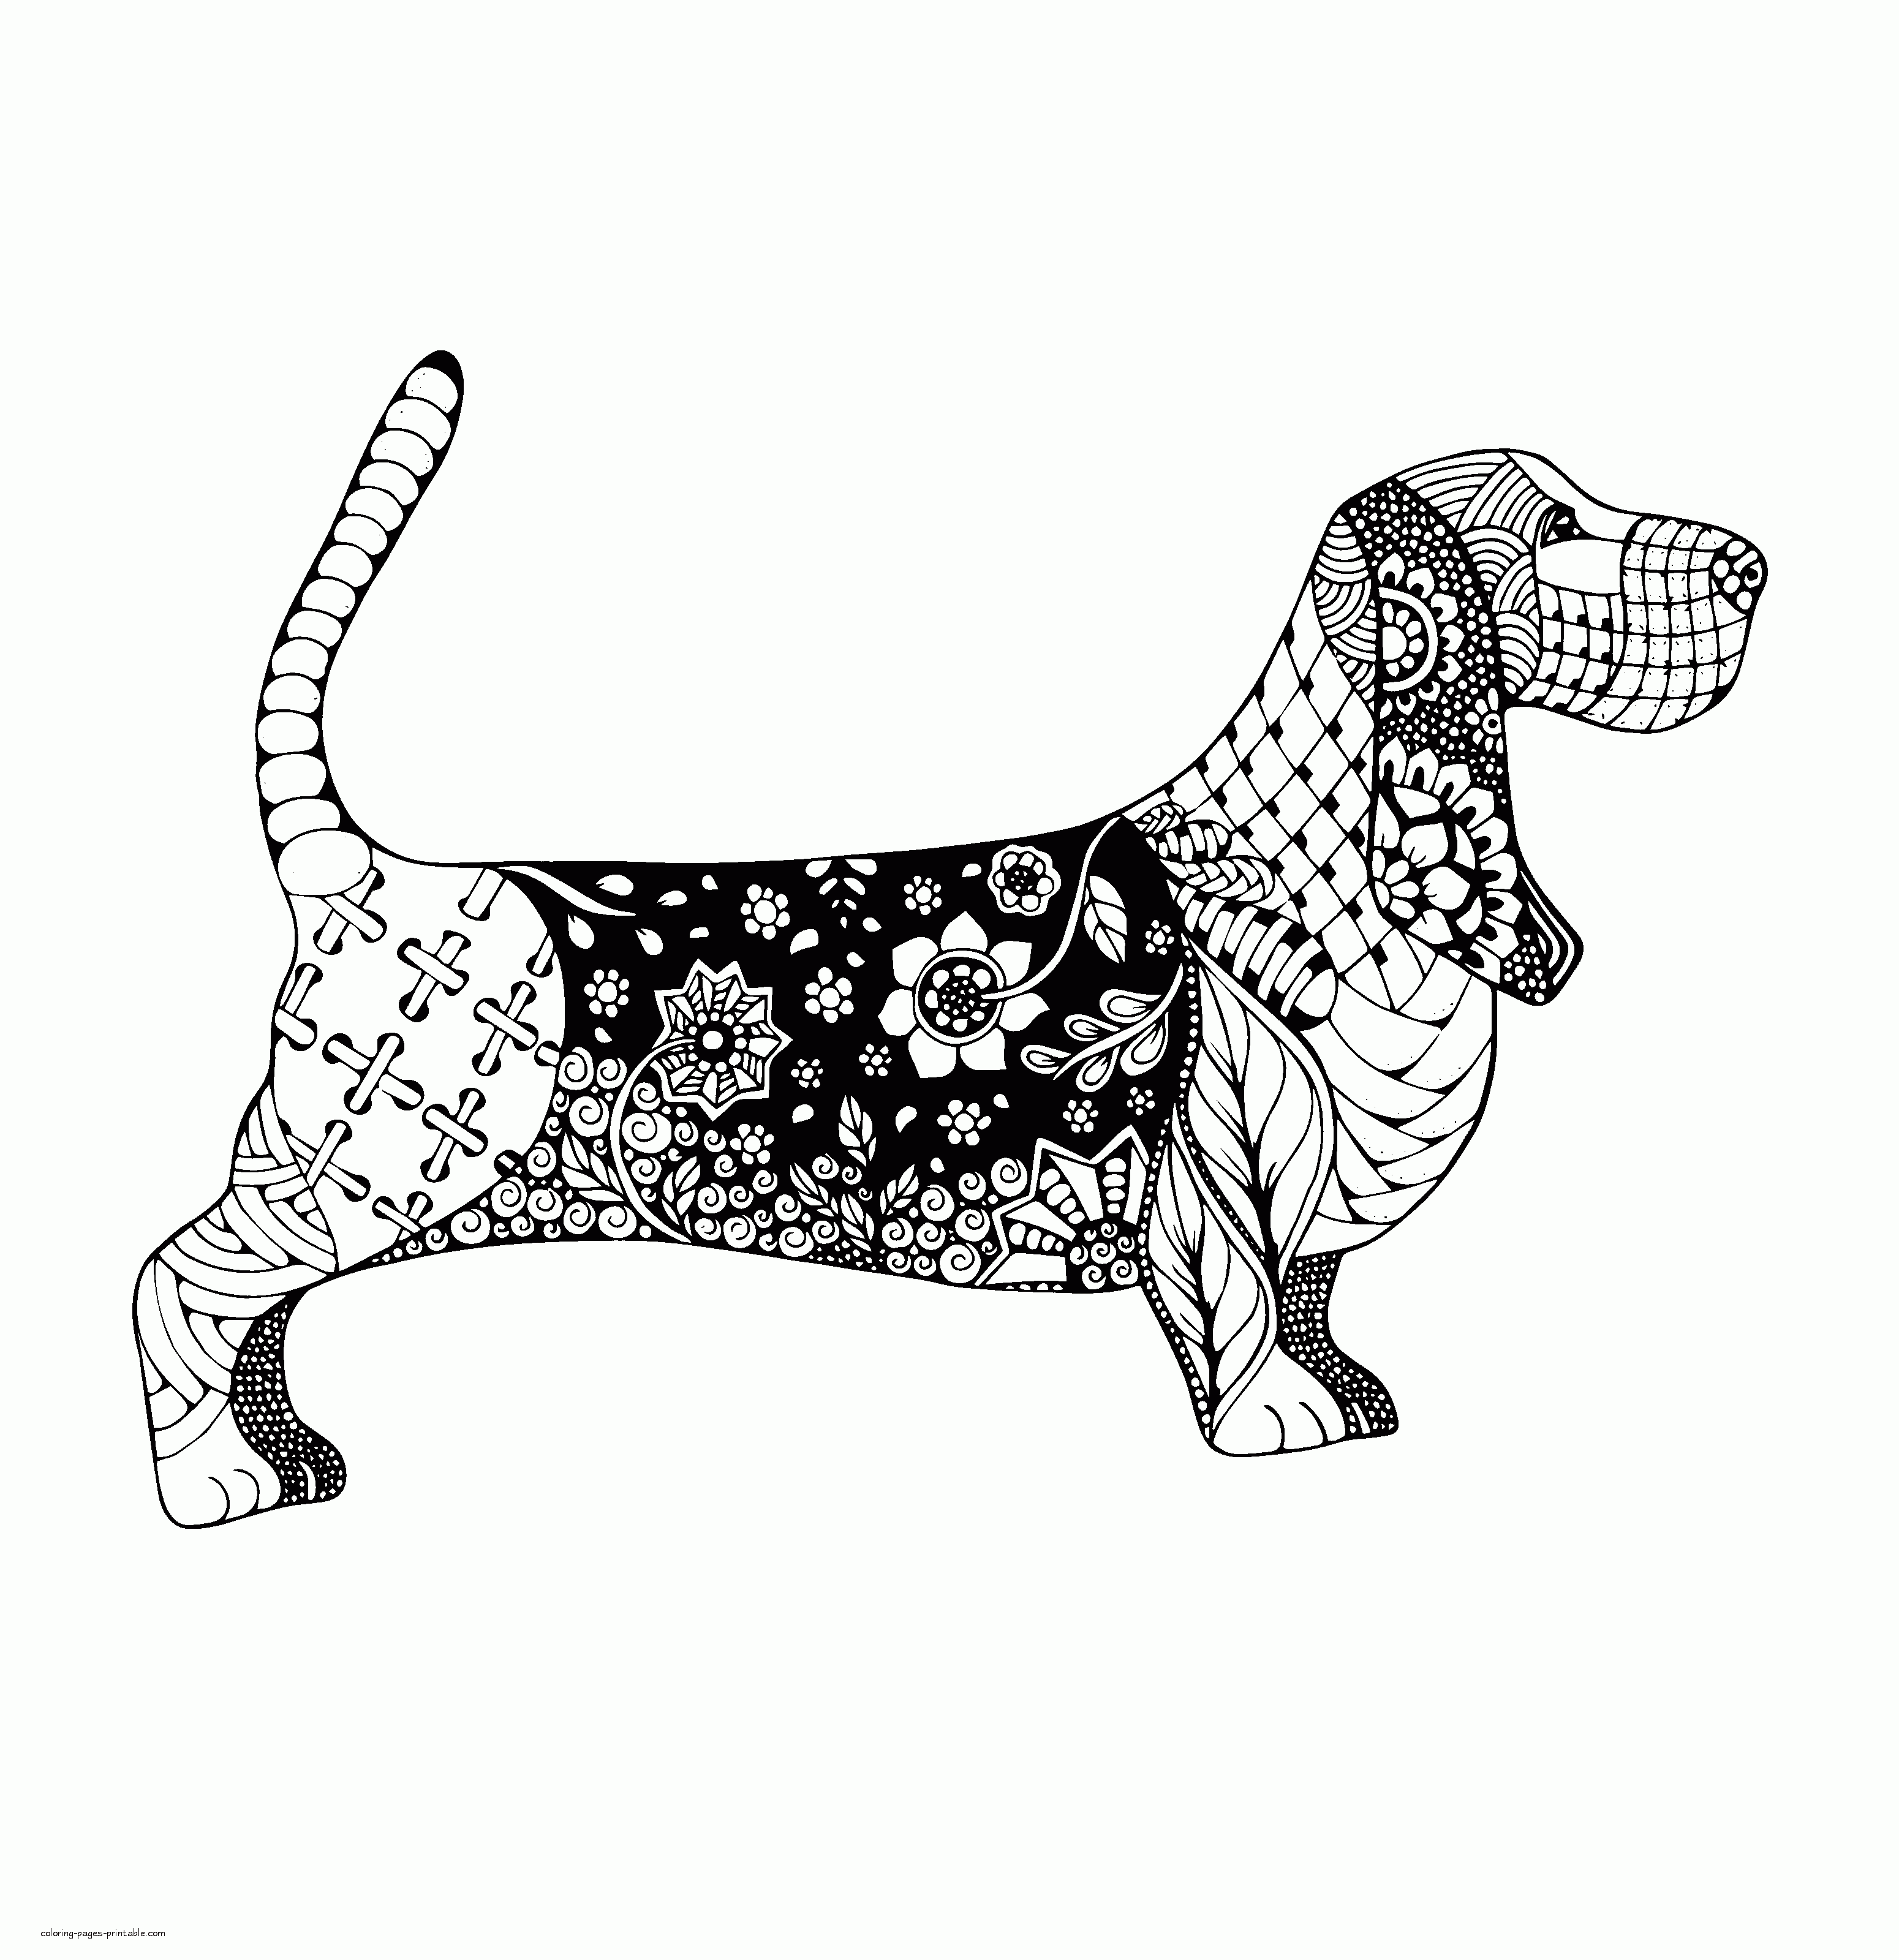 English Badger Dog Coloring Page    COLORING PAGES PRINTABLE.COM